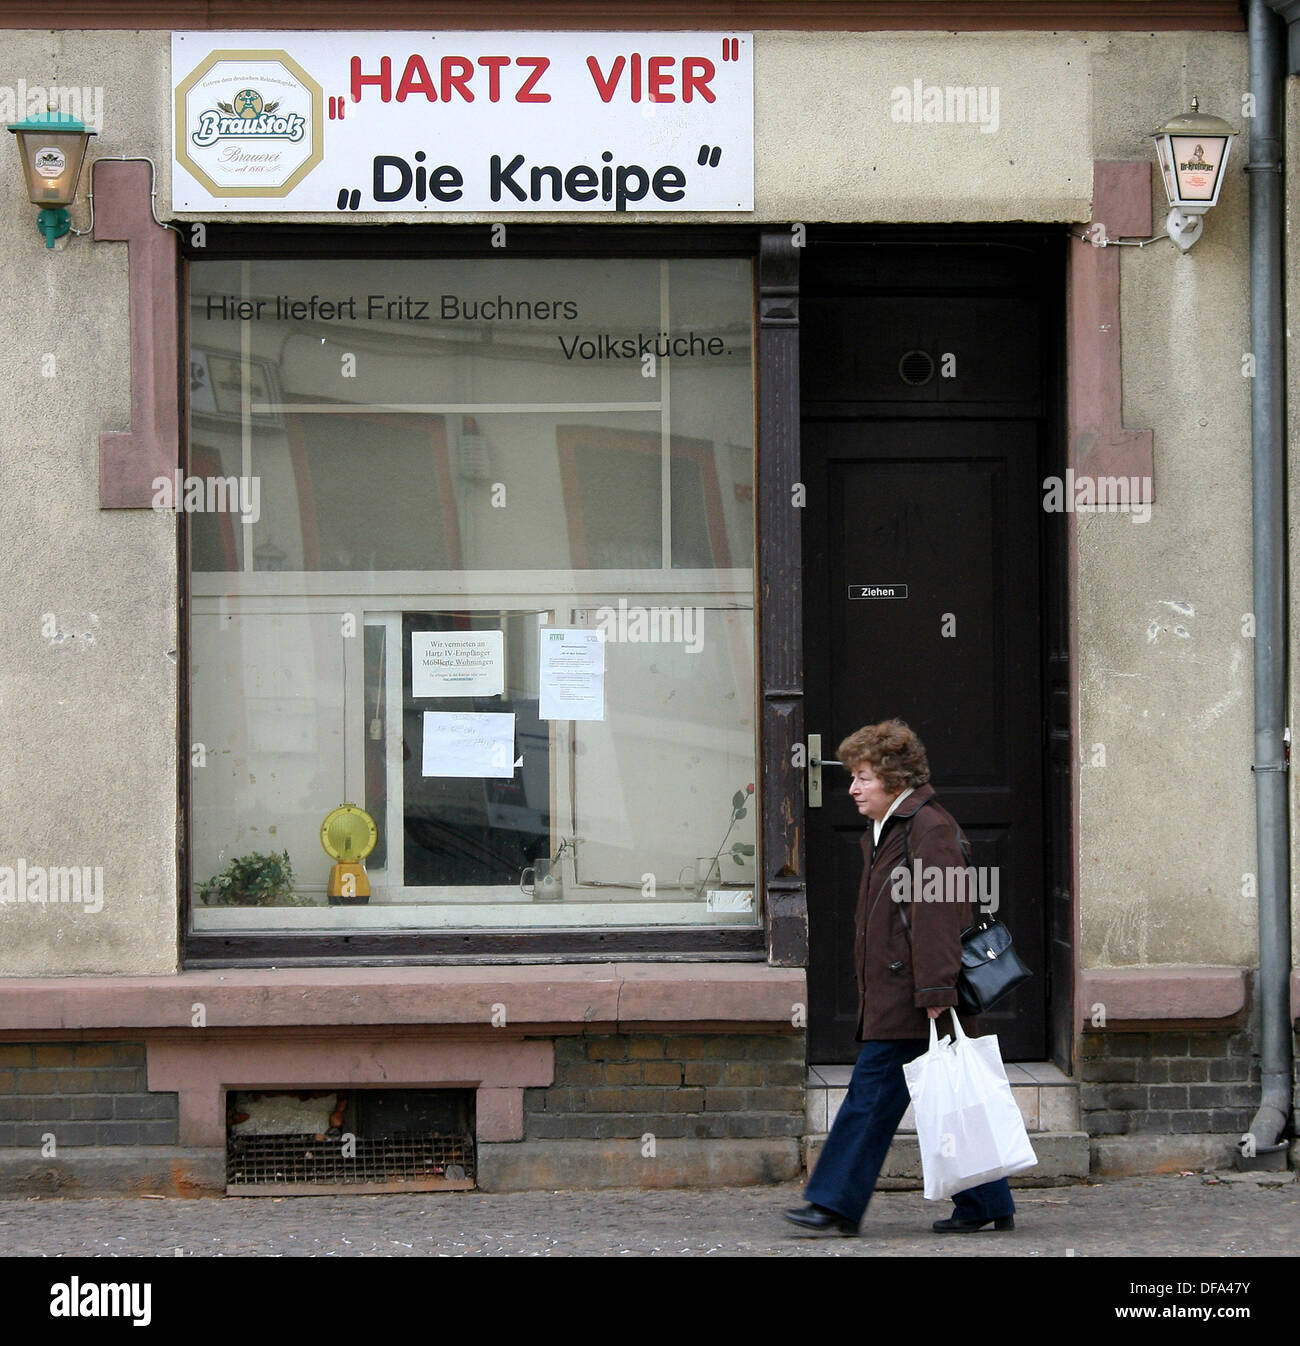 A woman walks past a bar called 'Hartz Vier' near the employment agency in Leipzig. The name alludes to the job market reform 'Hartz Vier'. Stock Photo